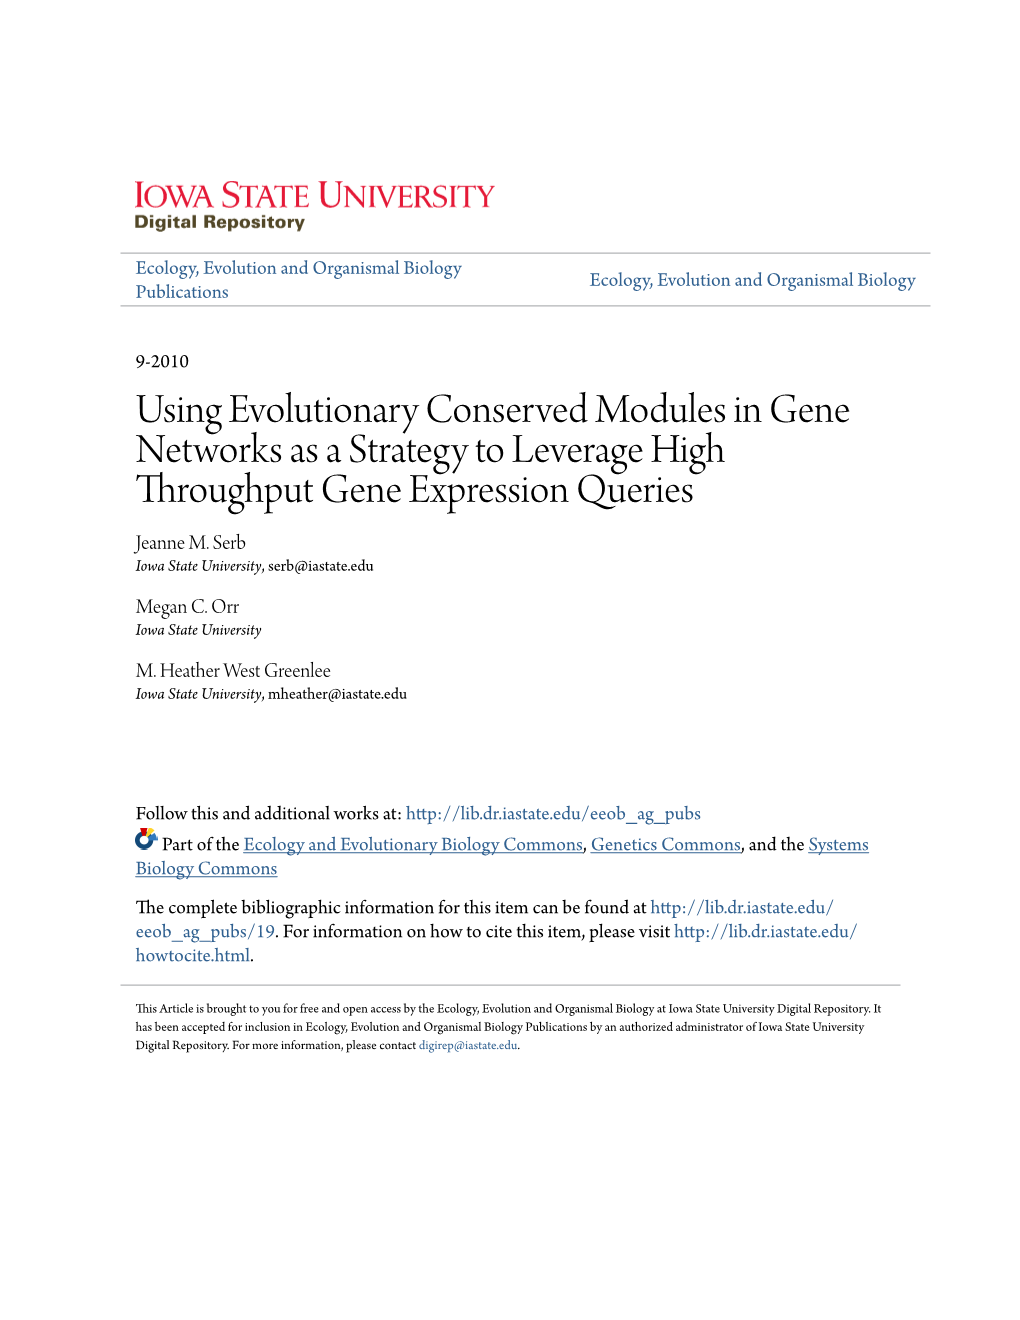 Using Evolutionary Conserved Modules in Gene Networks As a Strategy to Leverage High Throughput Gene Expression Queries Jeanne M